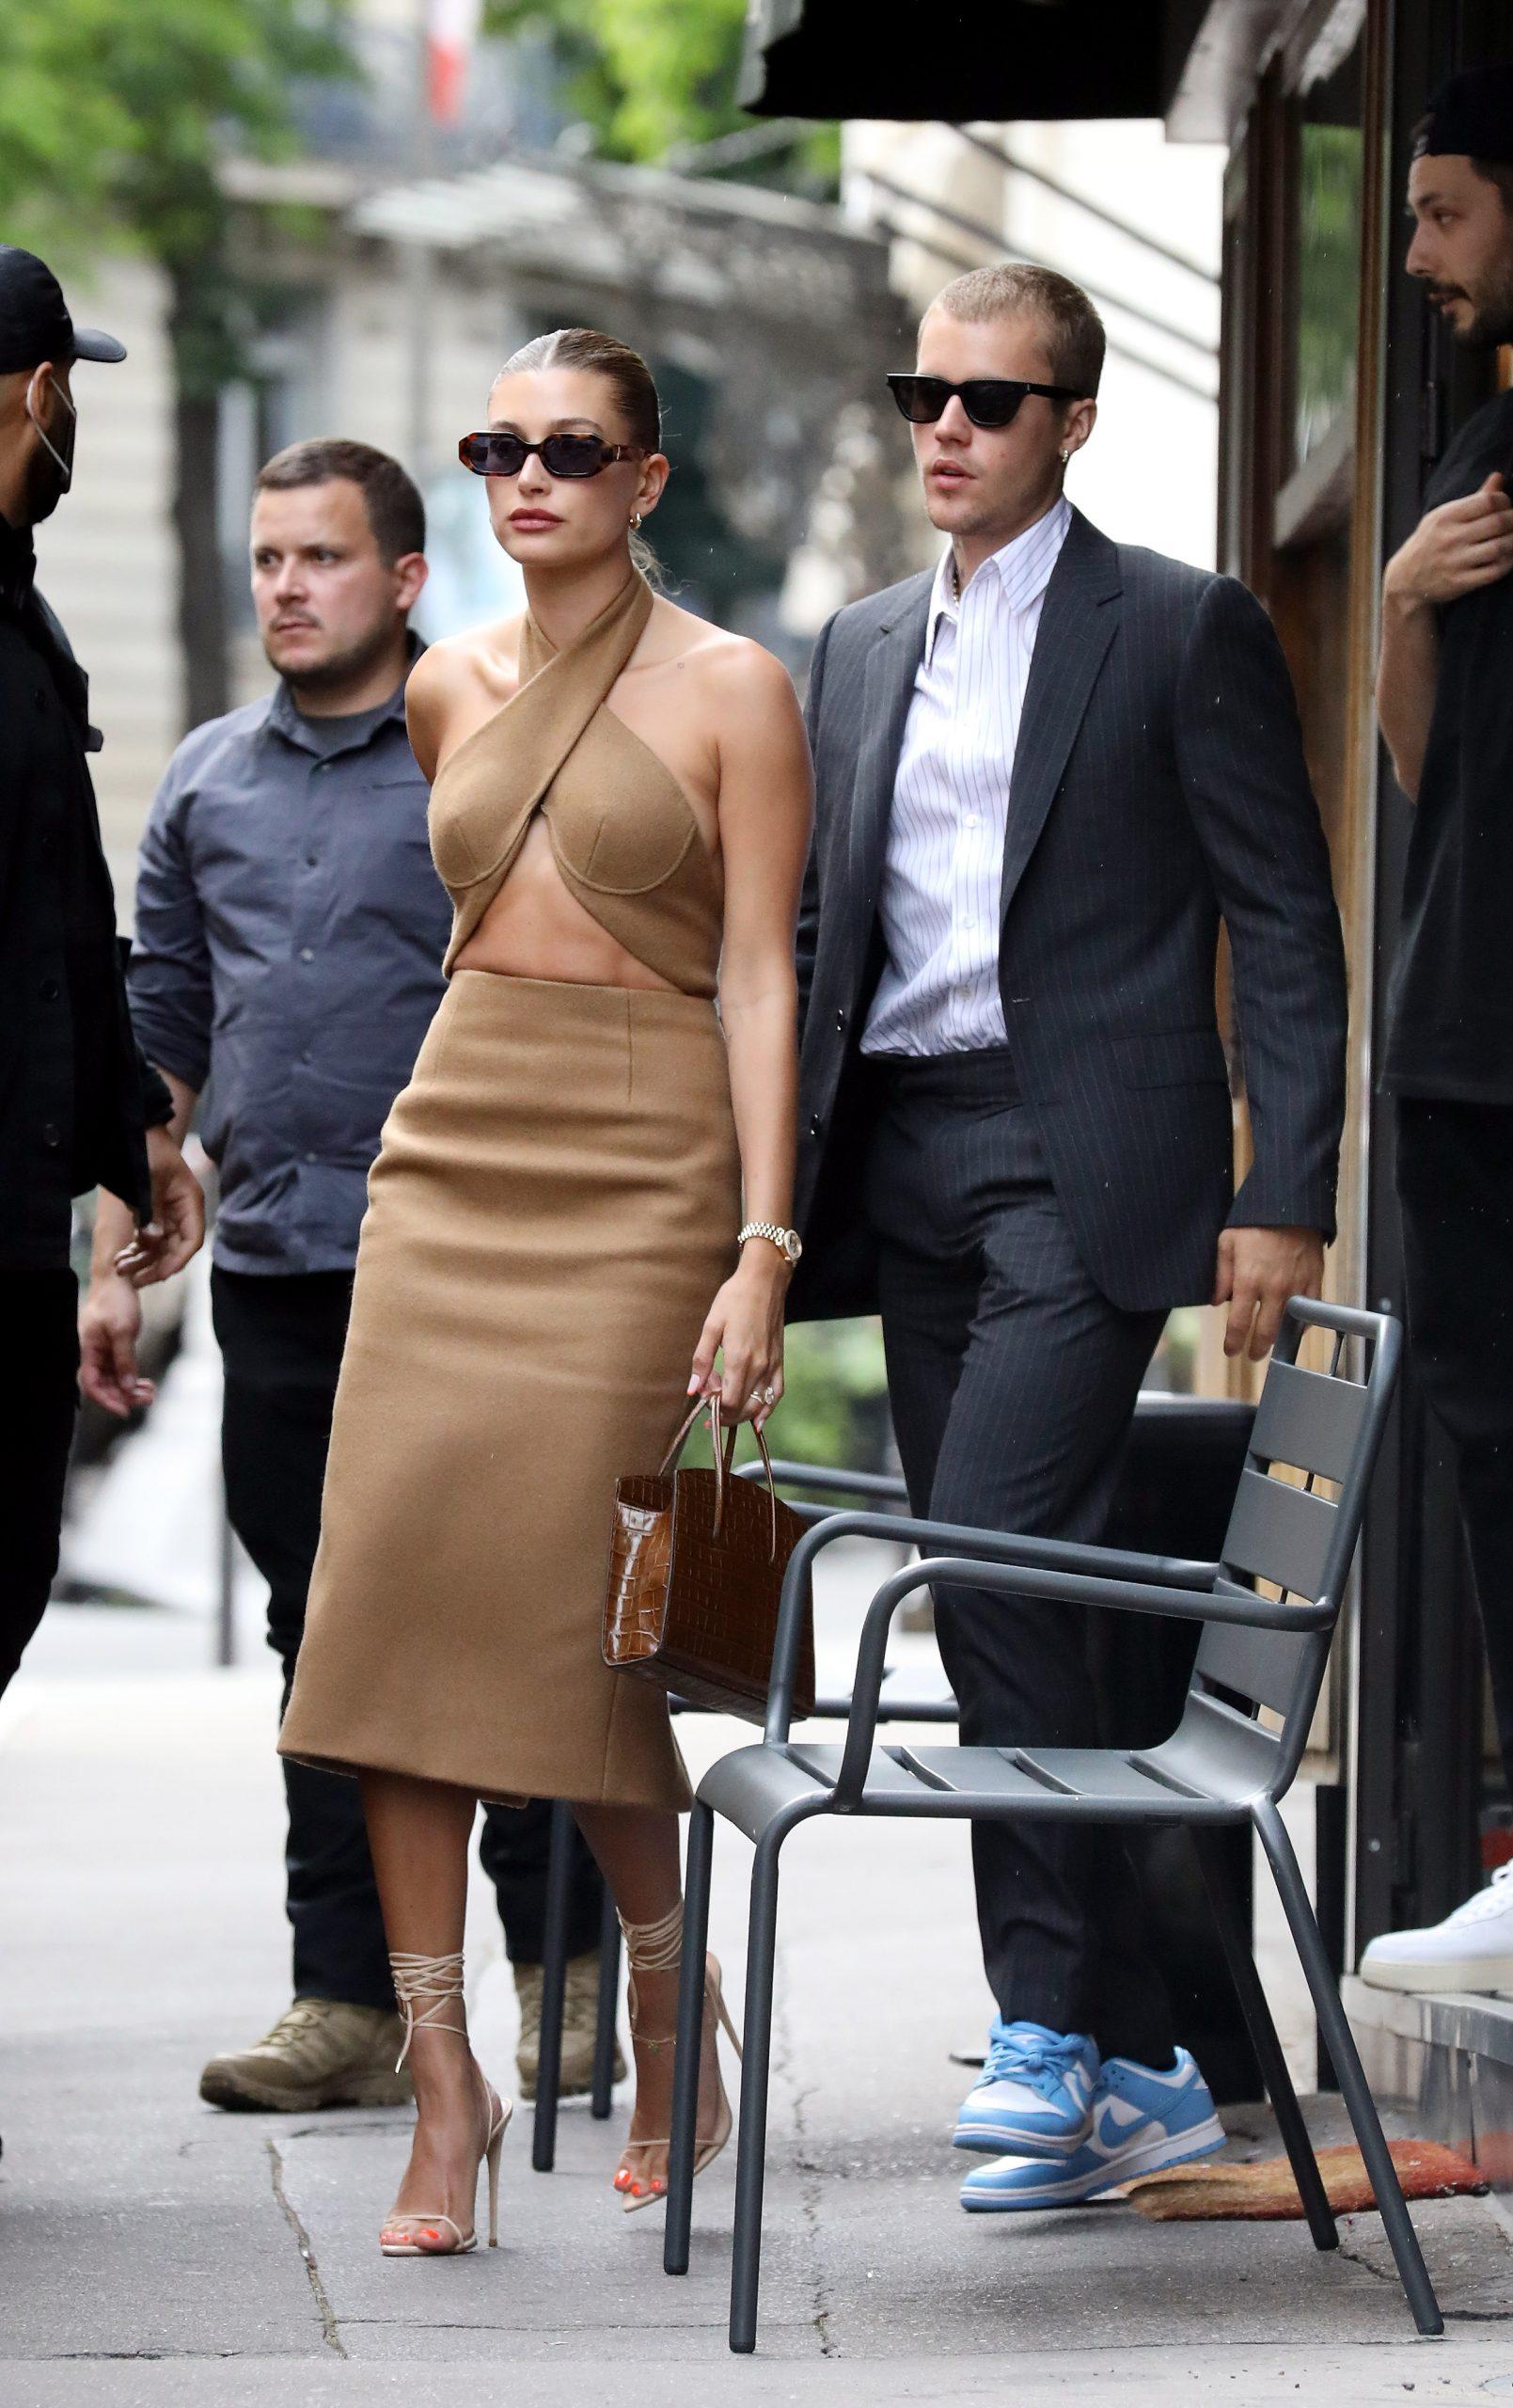 After being invited by President Macron at the Elysee Palace, Hailey Baldwin and Justin Bieber had lunch at the Dinand by Ferdi restaurant in Paris on June 21, 2021. 21 Jun 2021 Pictured: Hailey Baldwin and Justin Bieber. Photo credit: KCS Presse / MEGA TheMegaAgency.com +1 888 505 6342 (Mega Agency TagID: MEGA764117_009.jpg) [Photo via Mega Agency]